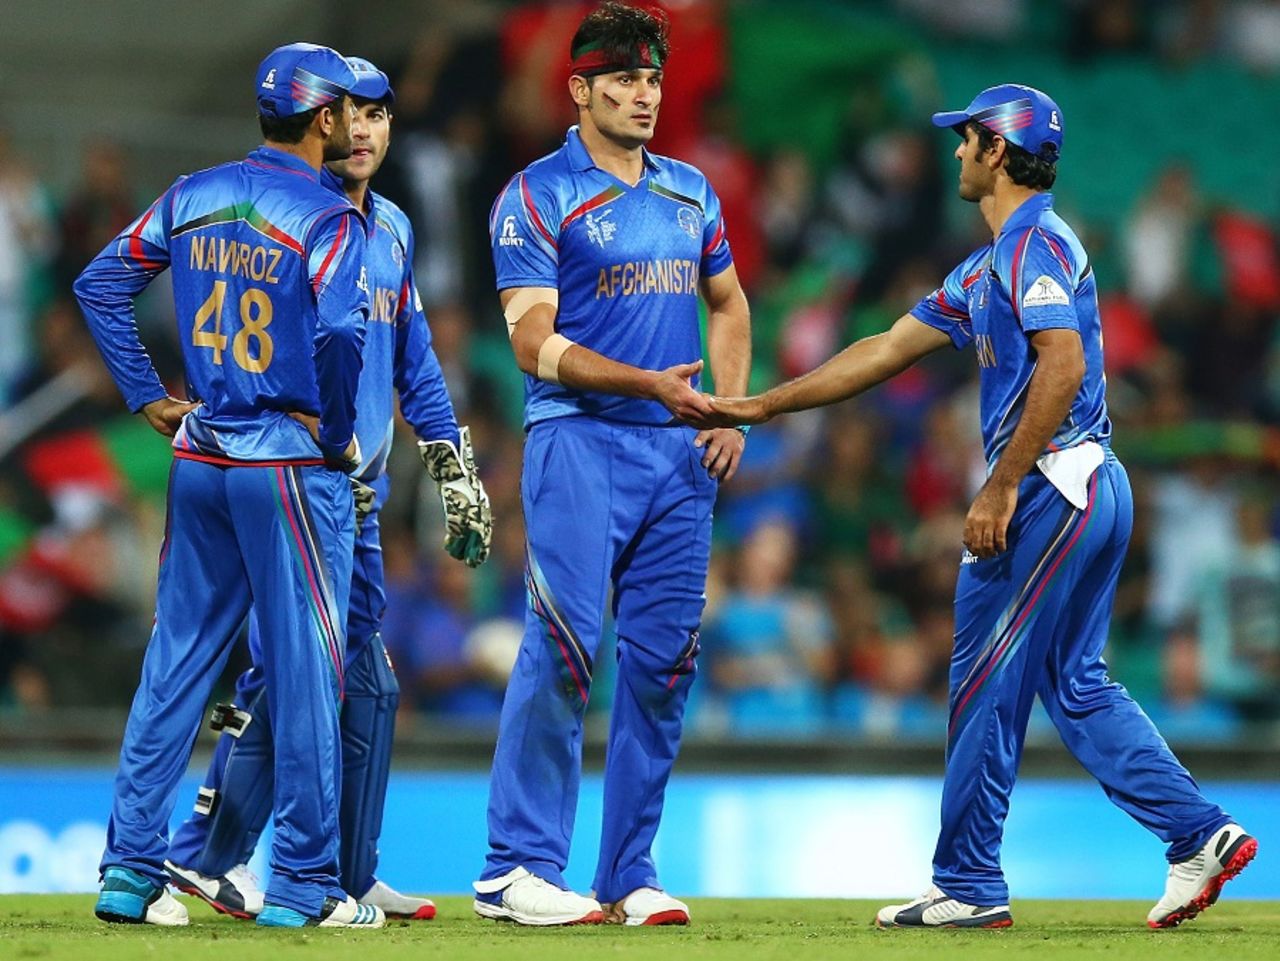 Hamid Hassan had Alex Hales nicking behind for 37, Afghanistan v England, World Cup 2015, Group A, Sydney, March 13, 2015